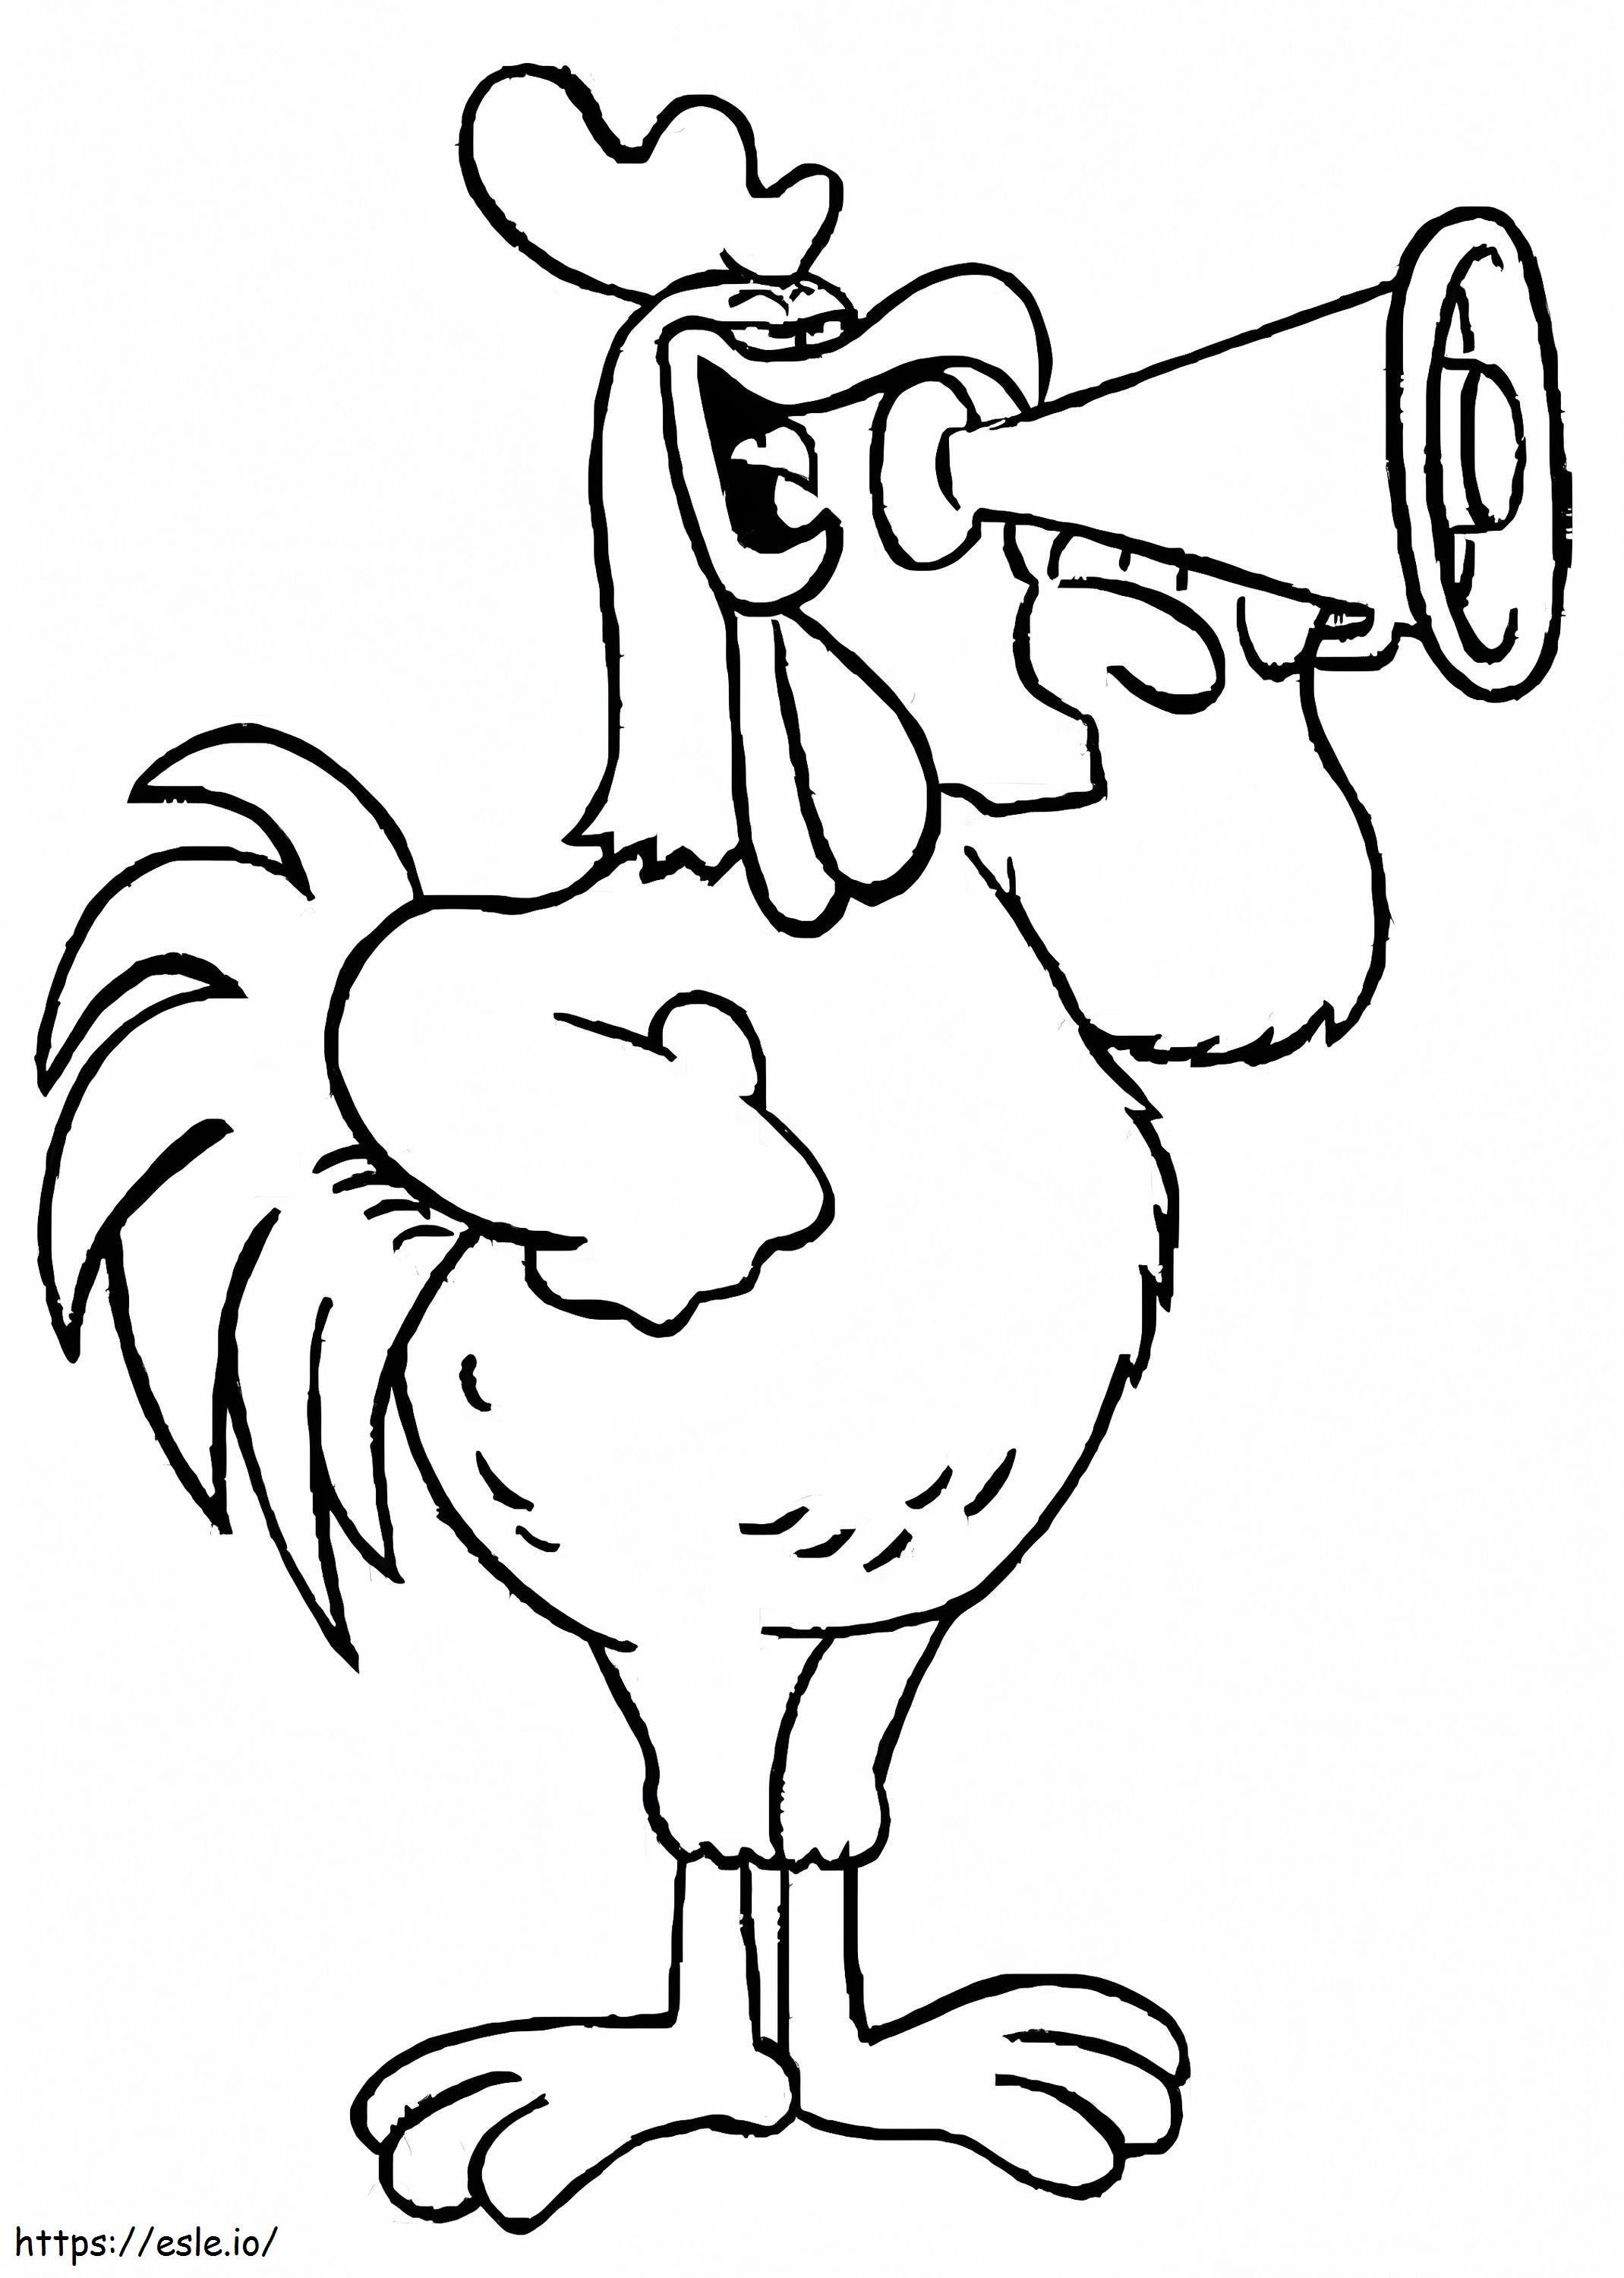 Rooster Plays The Trumpet coloring page